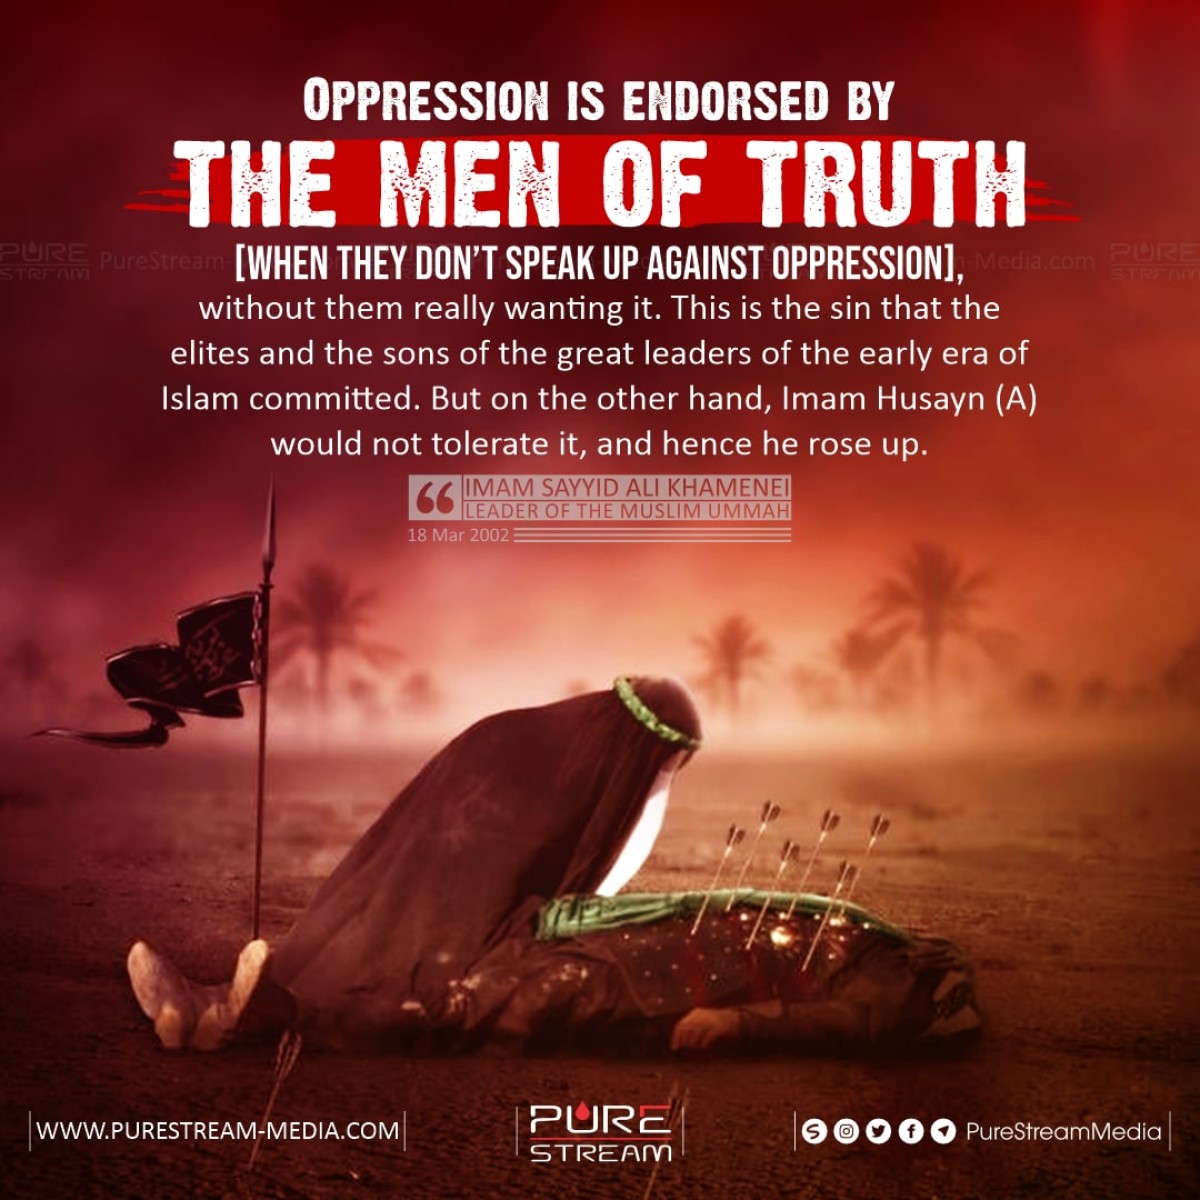 Oppression is endorsed by the men of Truth [when they don’t speak up against oppression], without them really wanting it